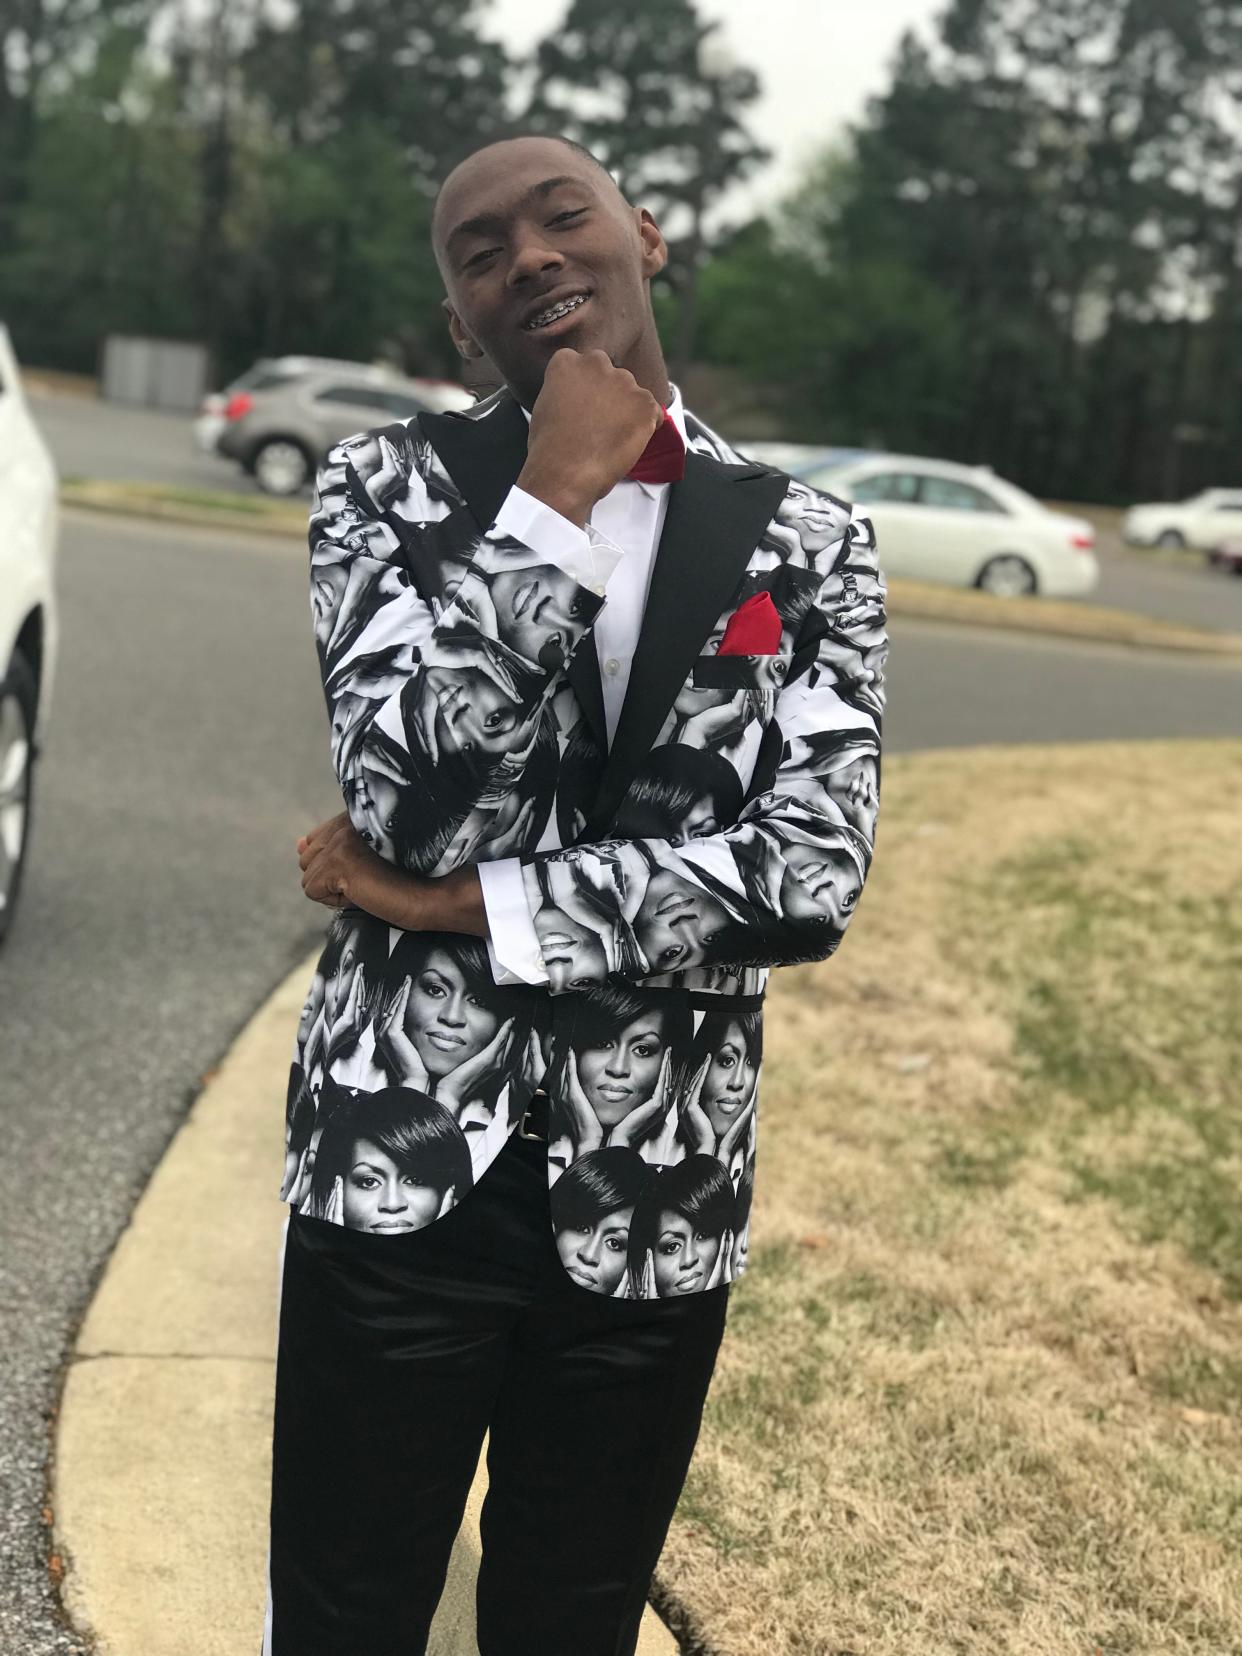 Teen wears a Michelle Obama printed tuxedo jacket to prom. (Photo: Courtesy of Terrence Torrence)